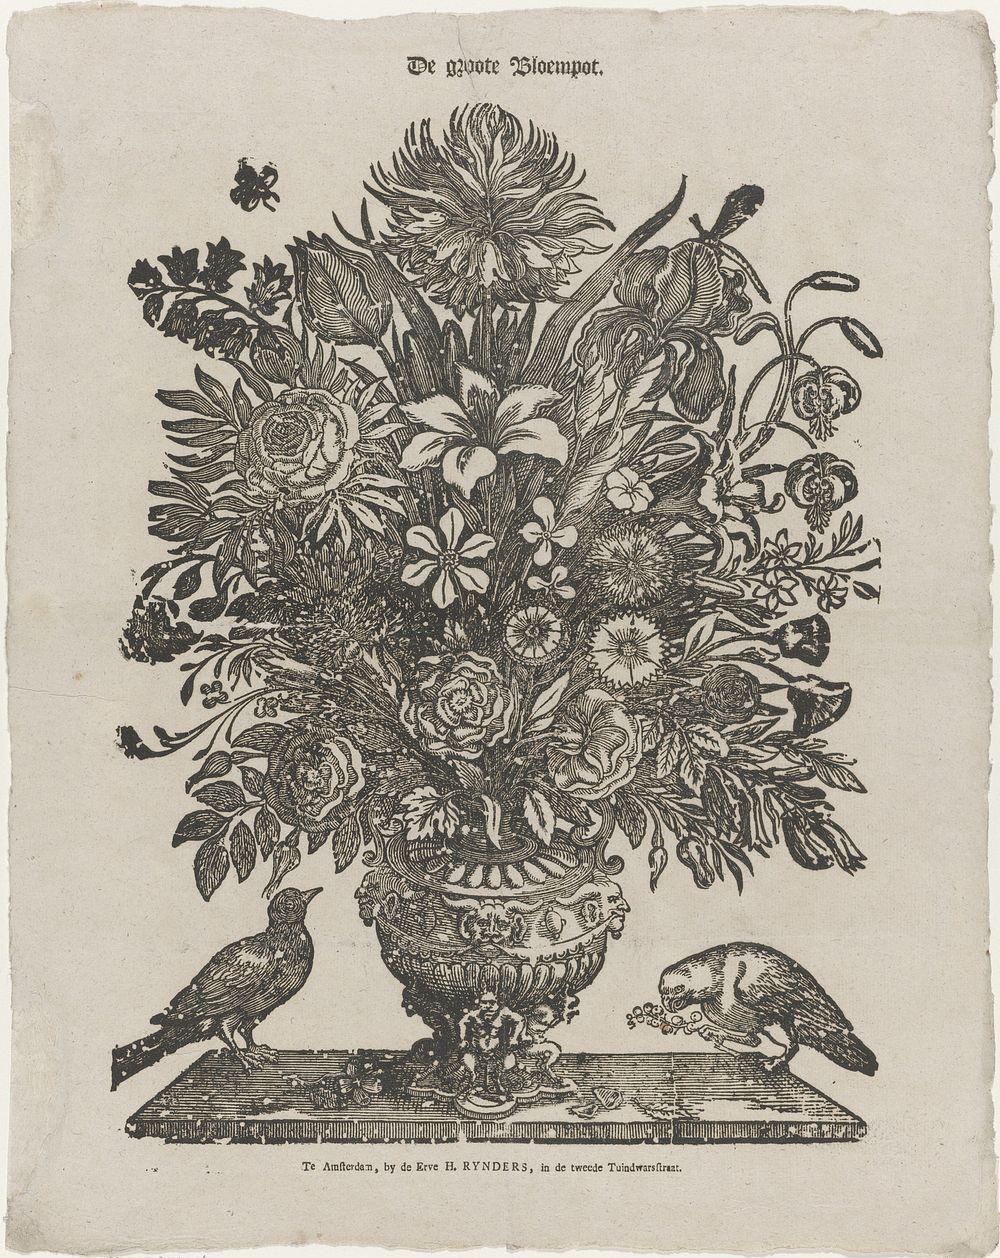 De groote bloempot (1831 - 1854) by anonymous and Erve H Rynders